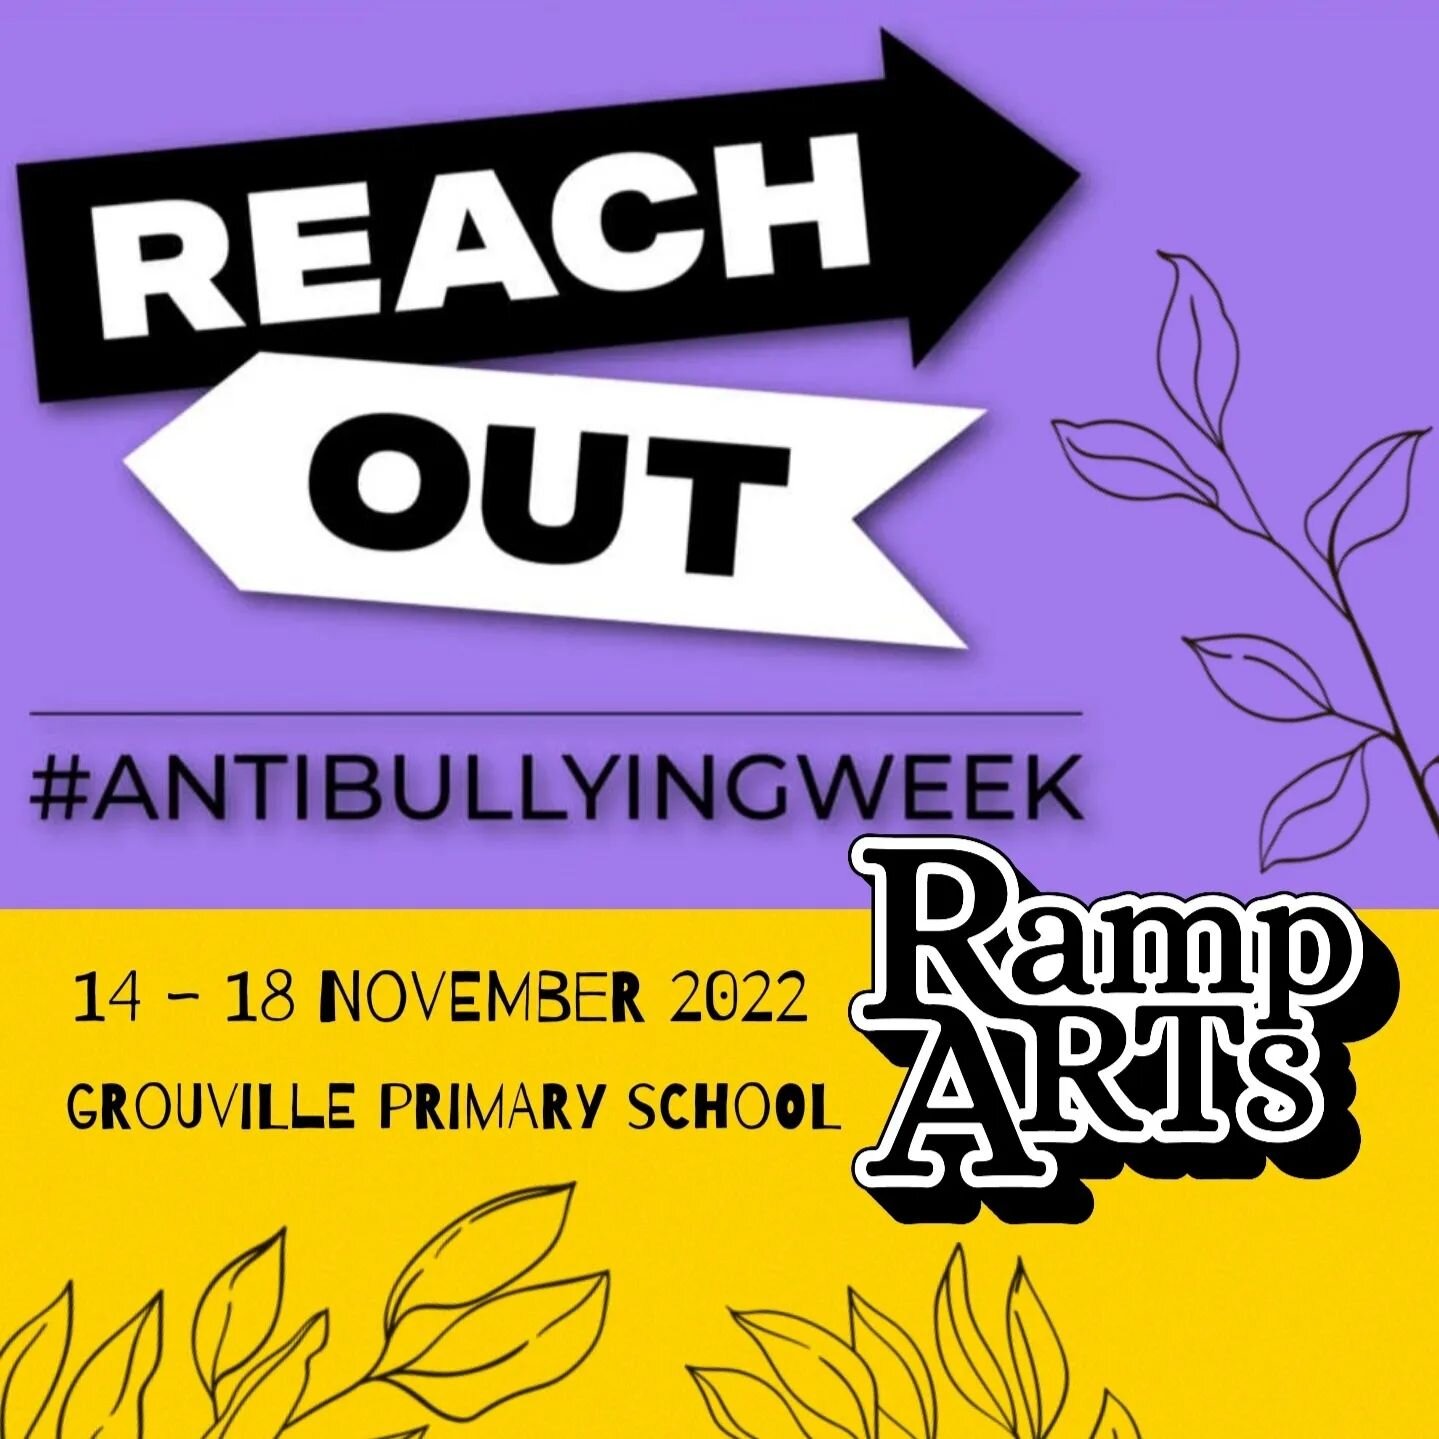 Have you ever been targeted for expressing yourself?....

Anti bullying week is an annual event which aims to raise awareness of bullying of children and young people and to highlight ways of preventing and responding to it 💛💜

In collaboration wit